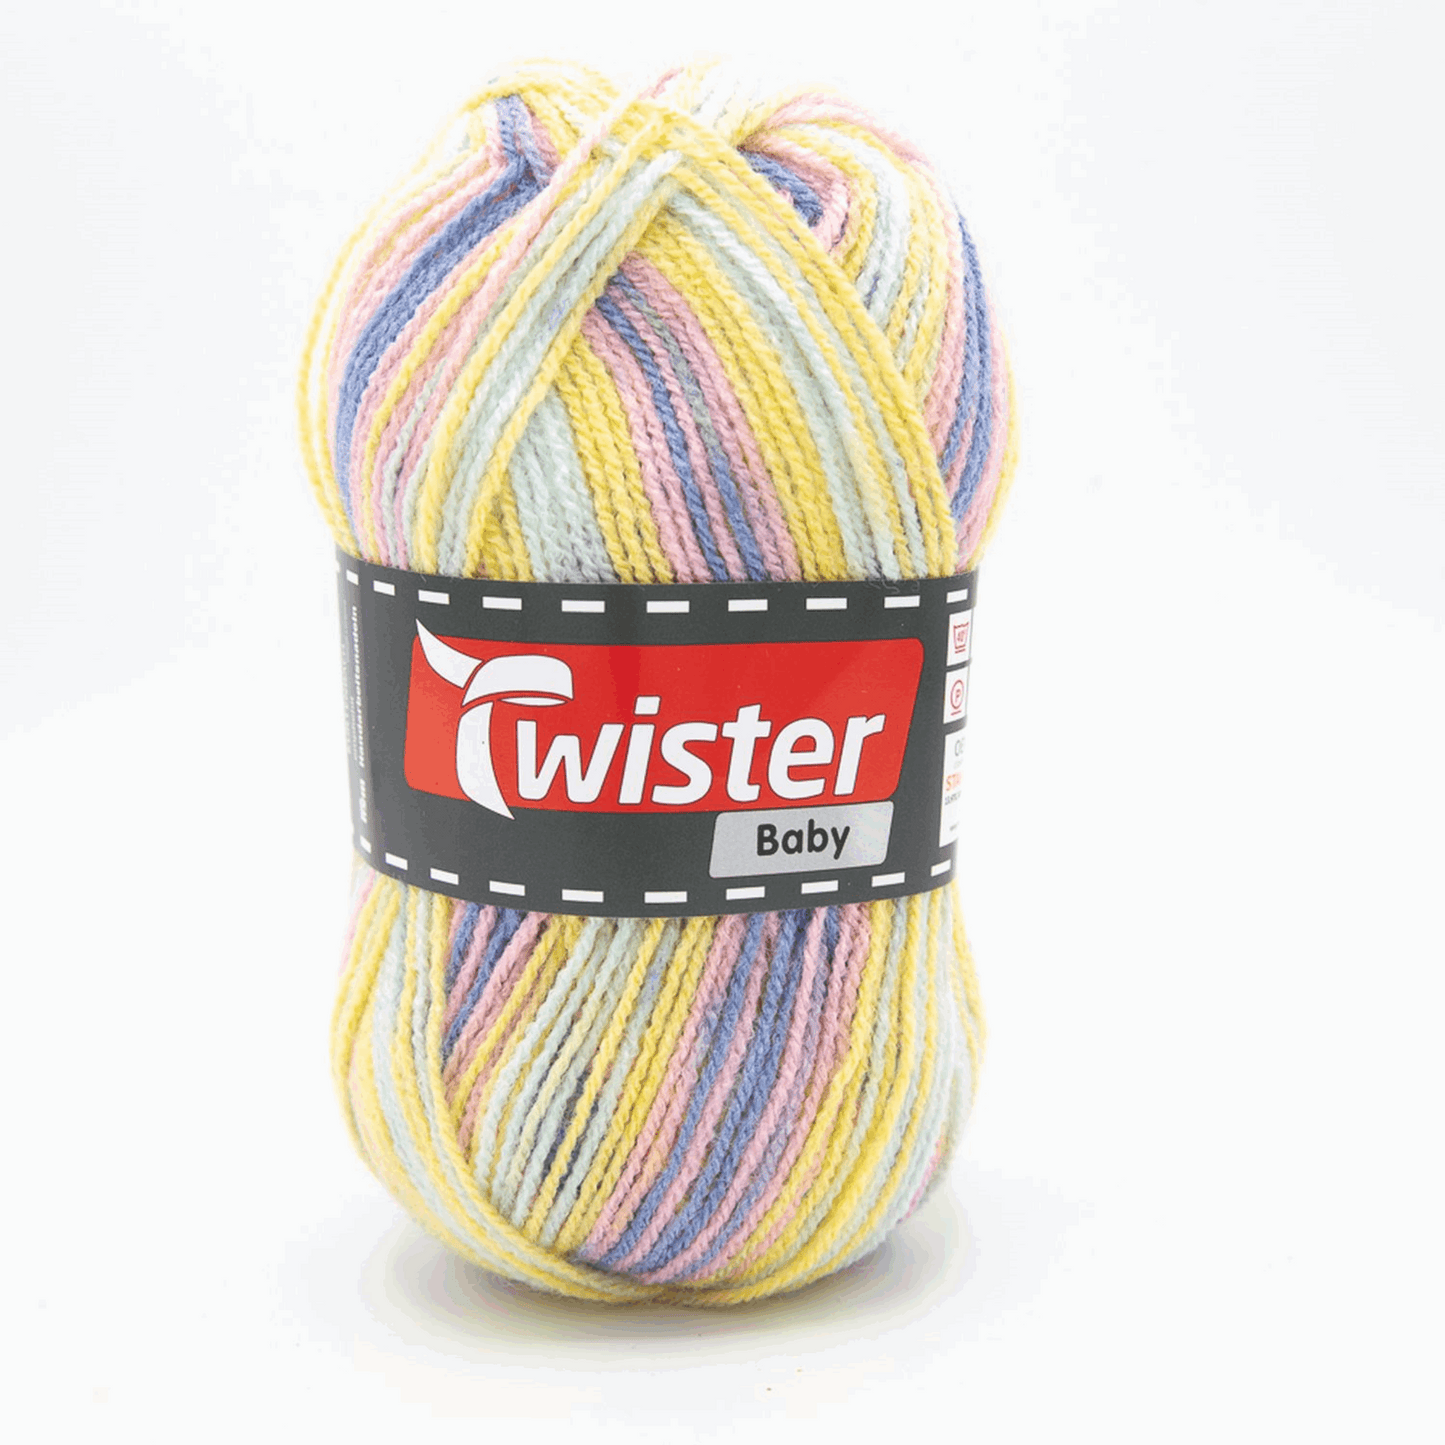 Twister Baby, 50g, 98346, Farbe pastell colo 91